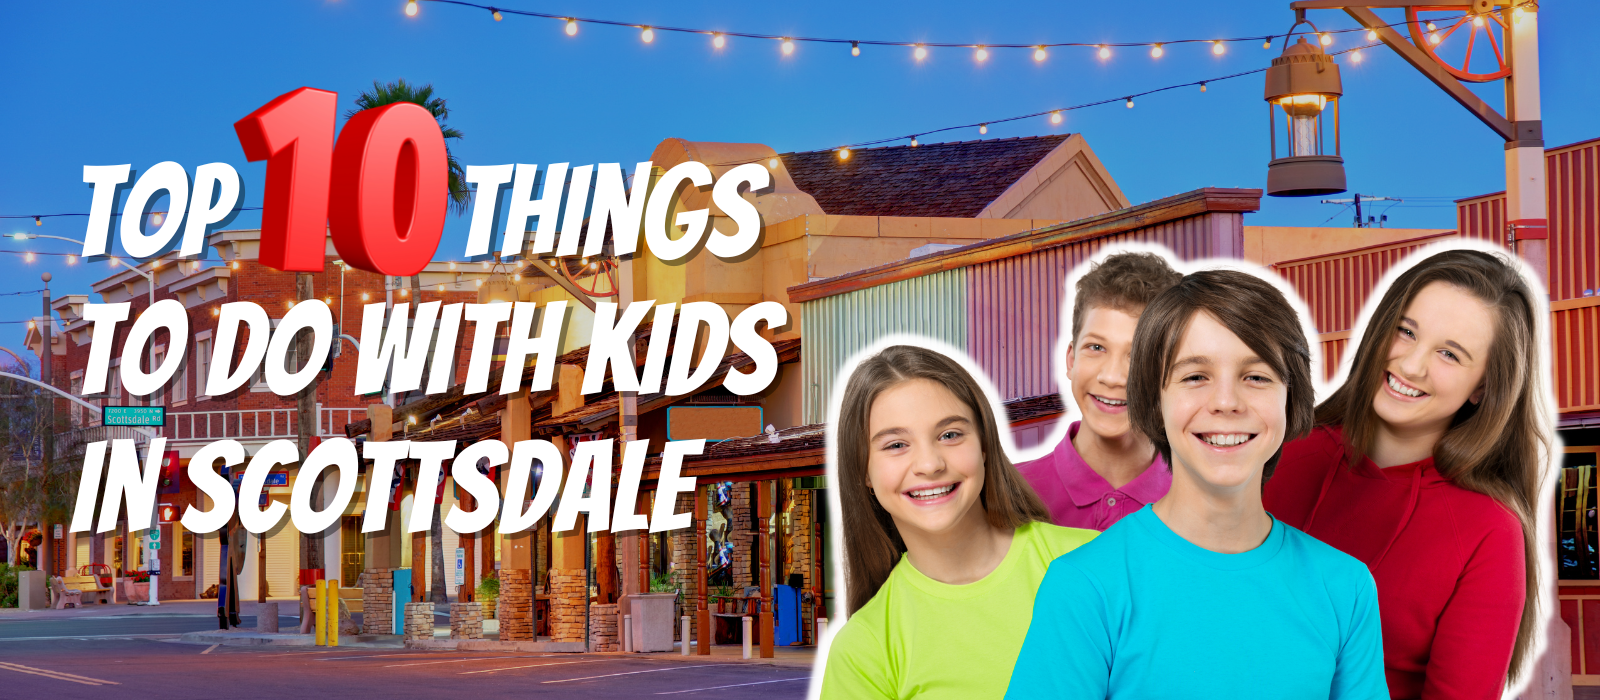 What Are The Top 10 Best Things to do With Kids in Scottsdale?